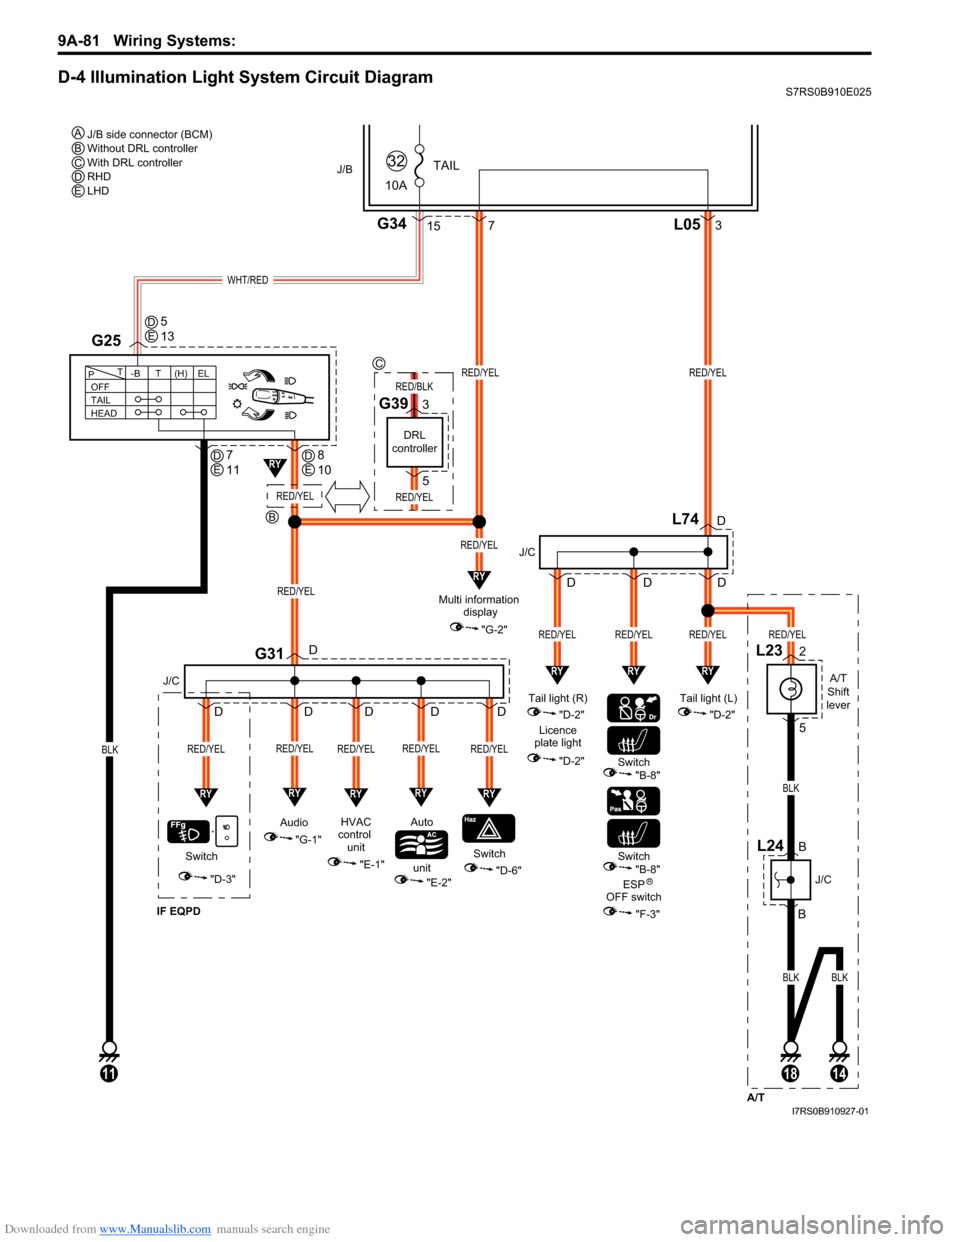 SUZUKI SWIFT 2007 2.G Service Workshop Manual Downloaded from www.Manualslib.com manuals search engine 9A-81 Wiring Systems: 
D-4 Illumination Light System Circuit DiagramS7RS0B910E025
WHT/RED
A/T
Shift
lever
L23
L742
5
BLK
BLKBLK
10A
TAIL
32J/B
